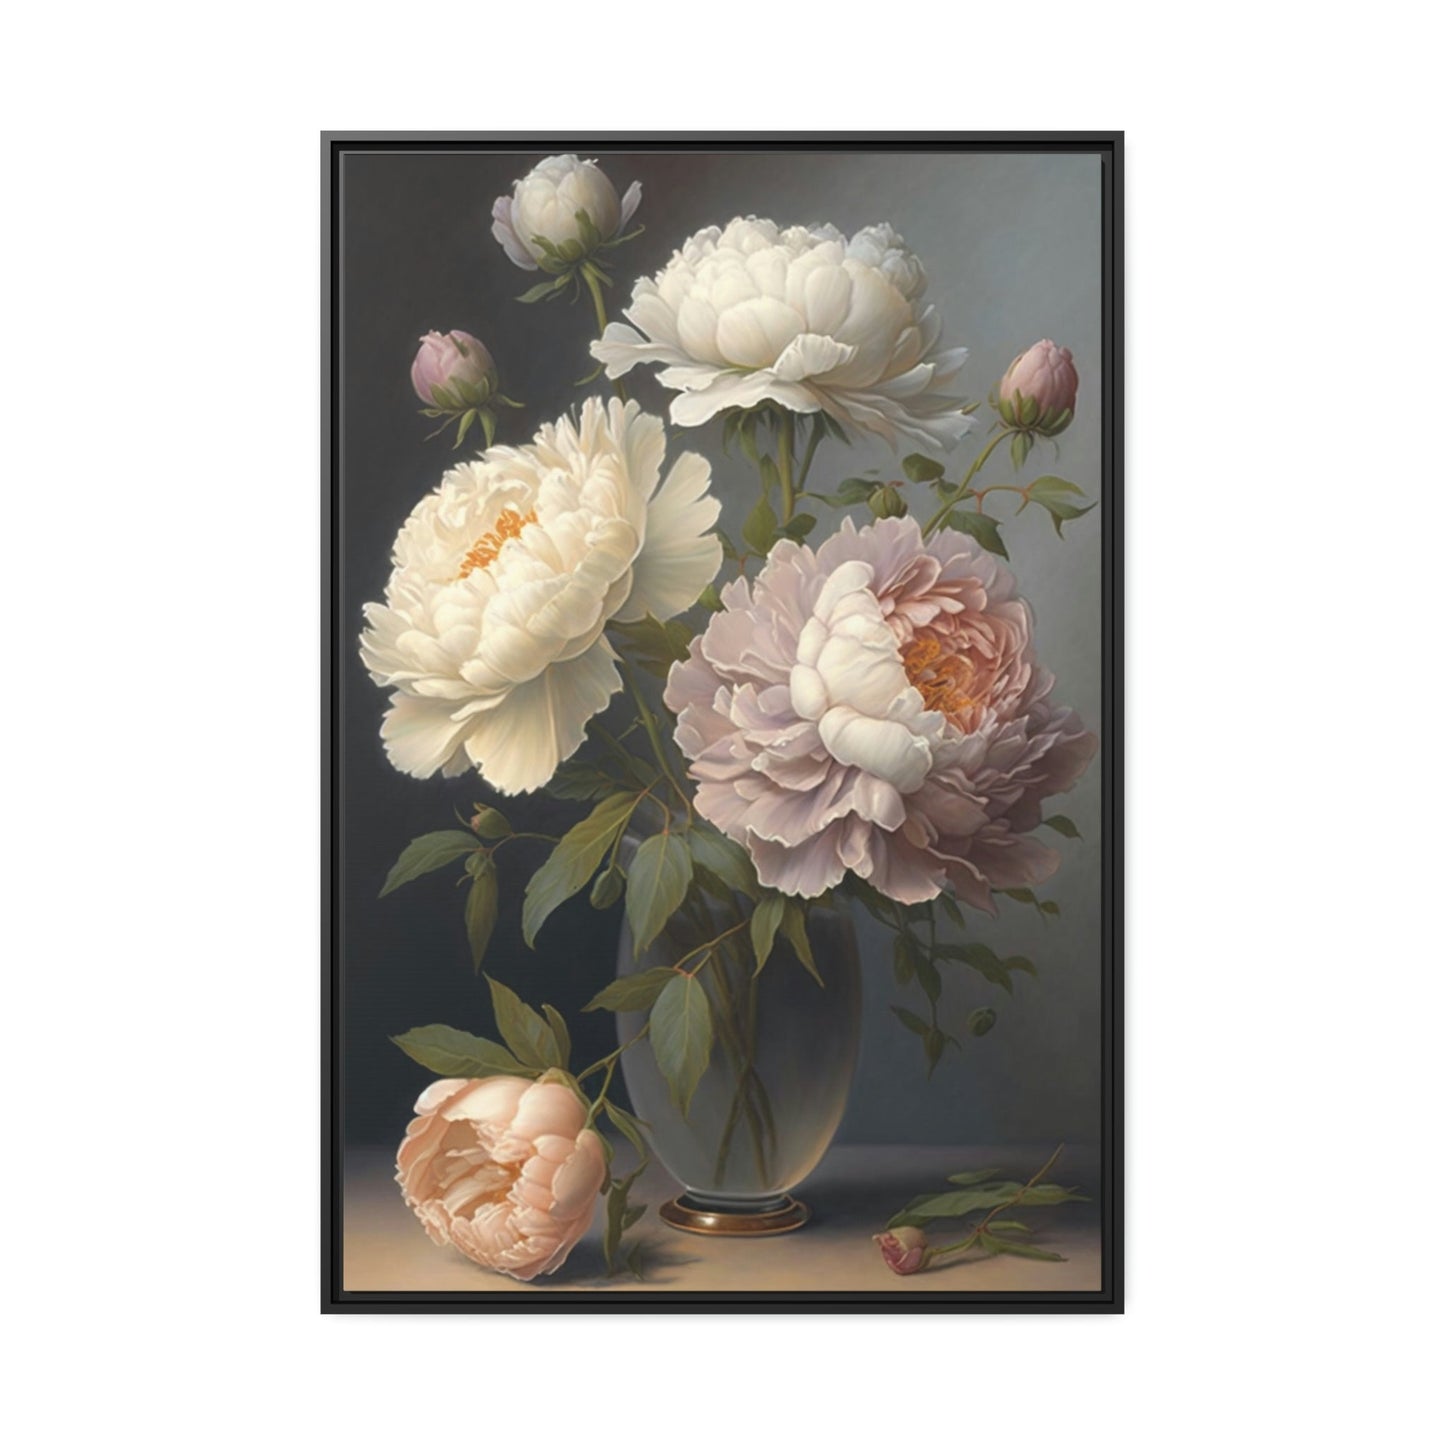 Peony Perfection: A Floral Fantasy